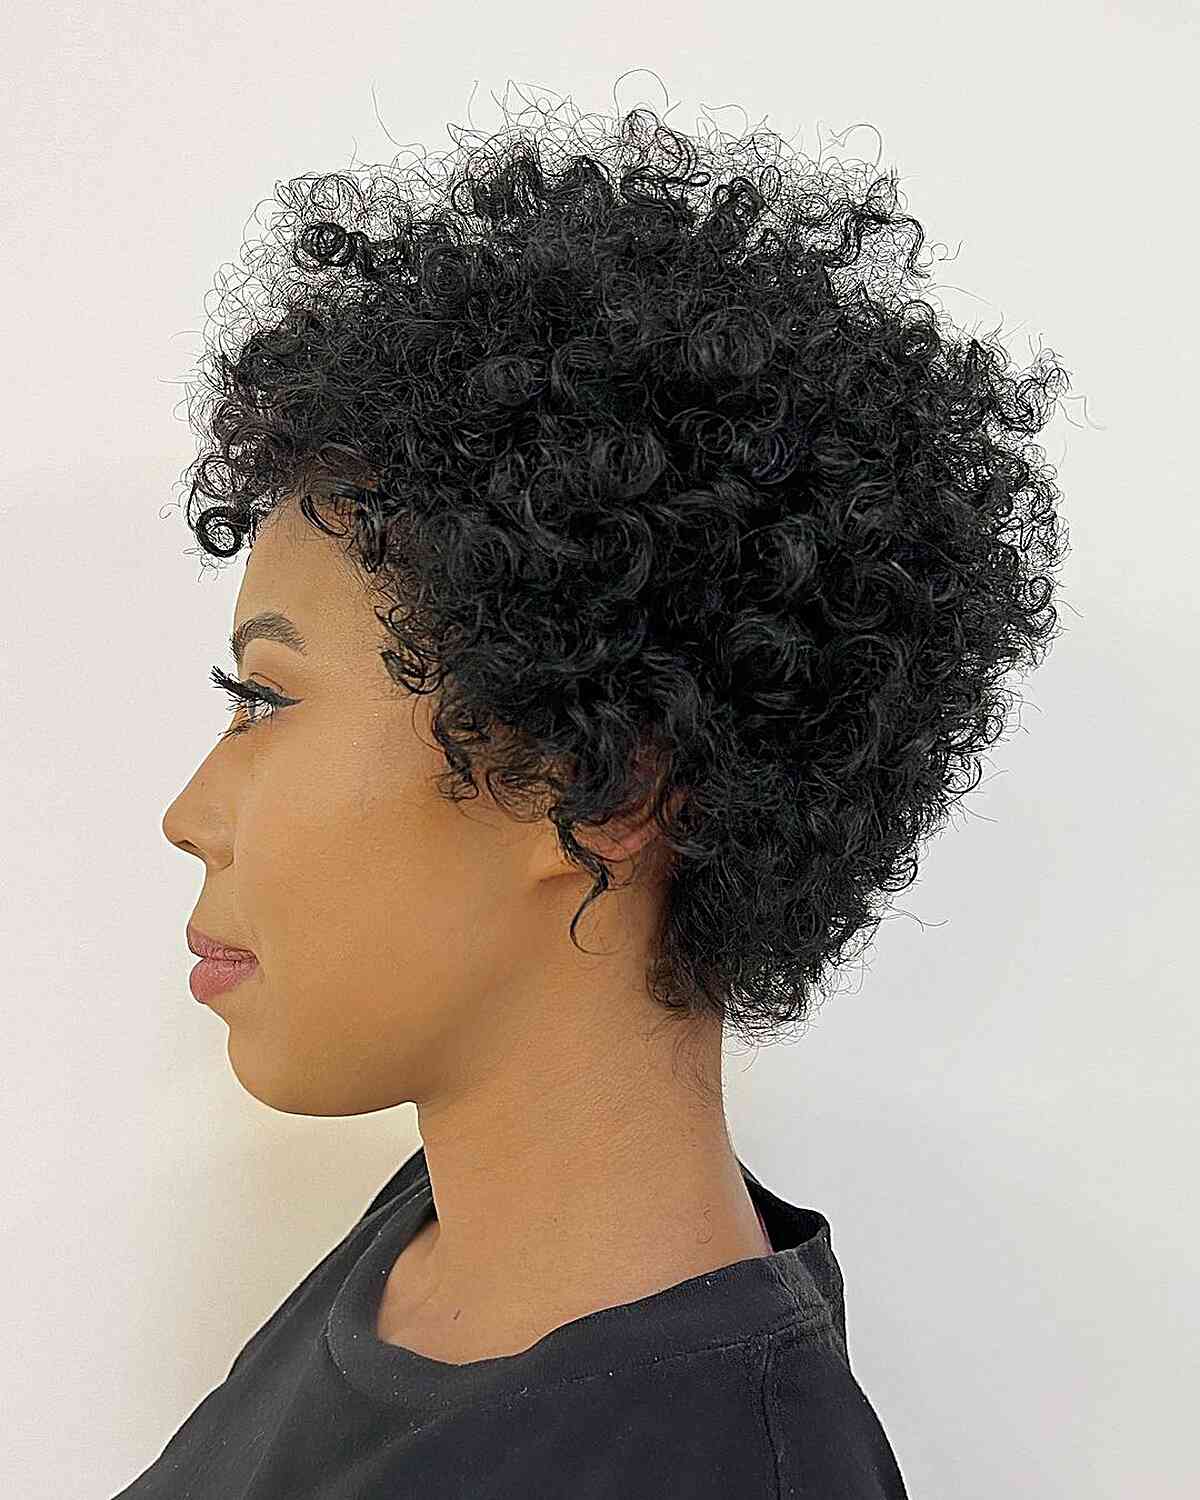 Scissor-Cut Pixie for Black Women with Curly Hair